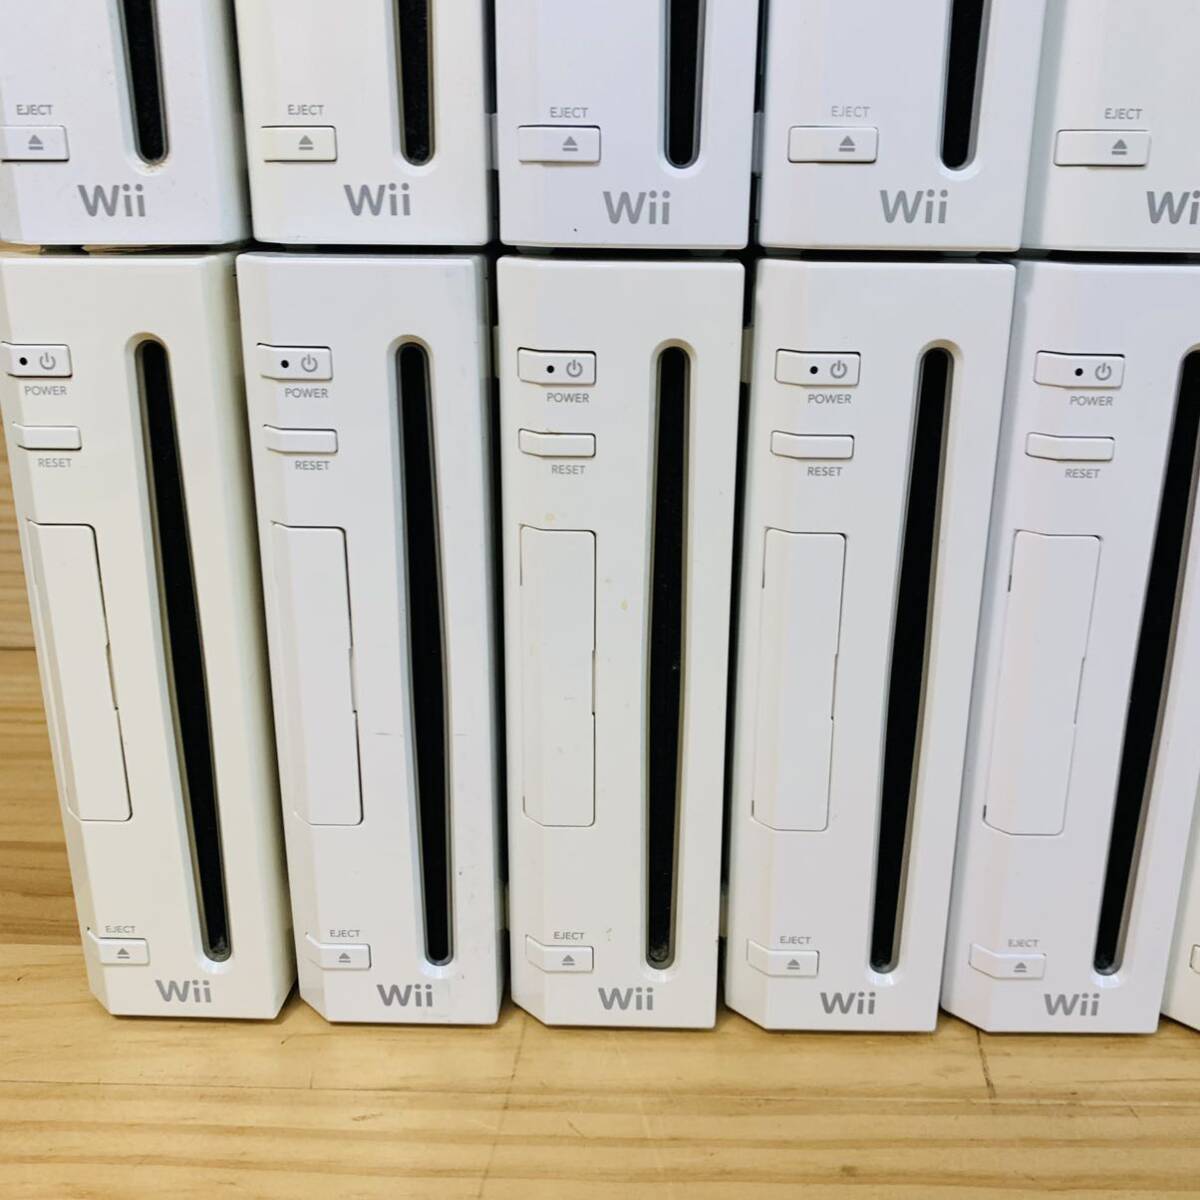 AAG28973 まとめ売り ジャンク品 Wii 本体 20台セット_画像4